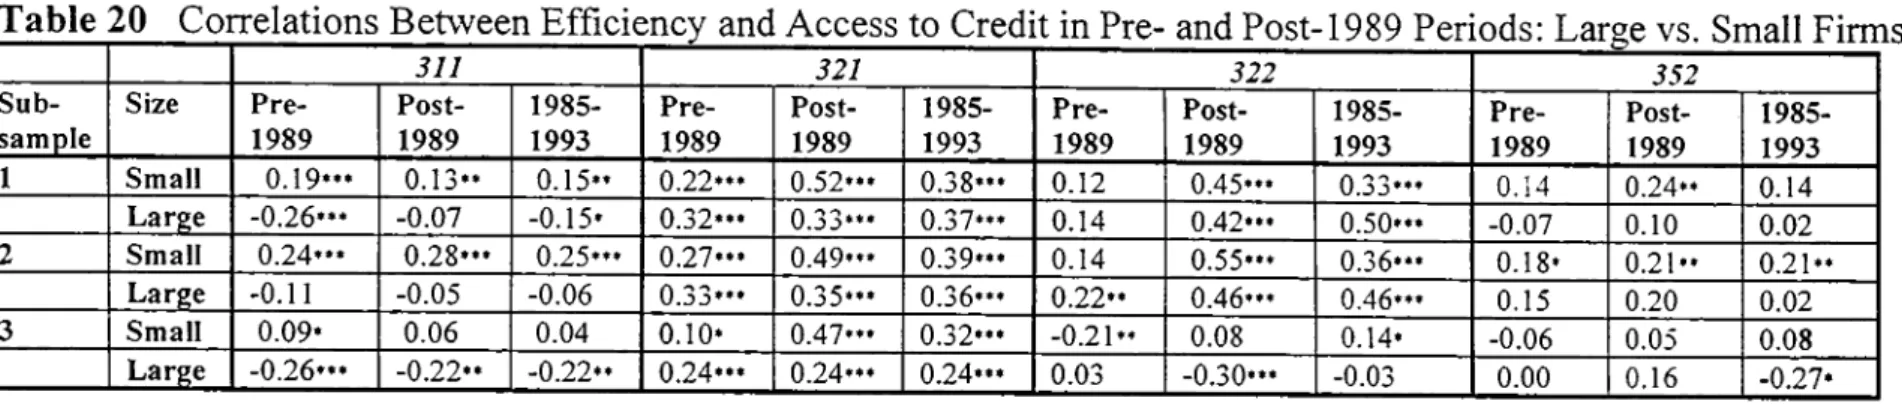 Table 20  Correlations Between Efficiency and Access to Credit in Pre- and Post-1989 Periods: Large vs